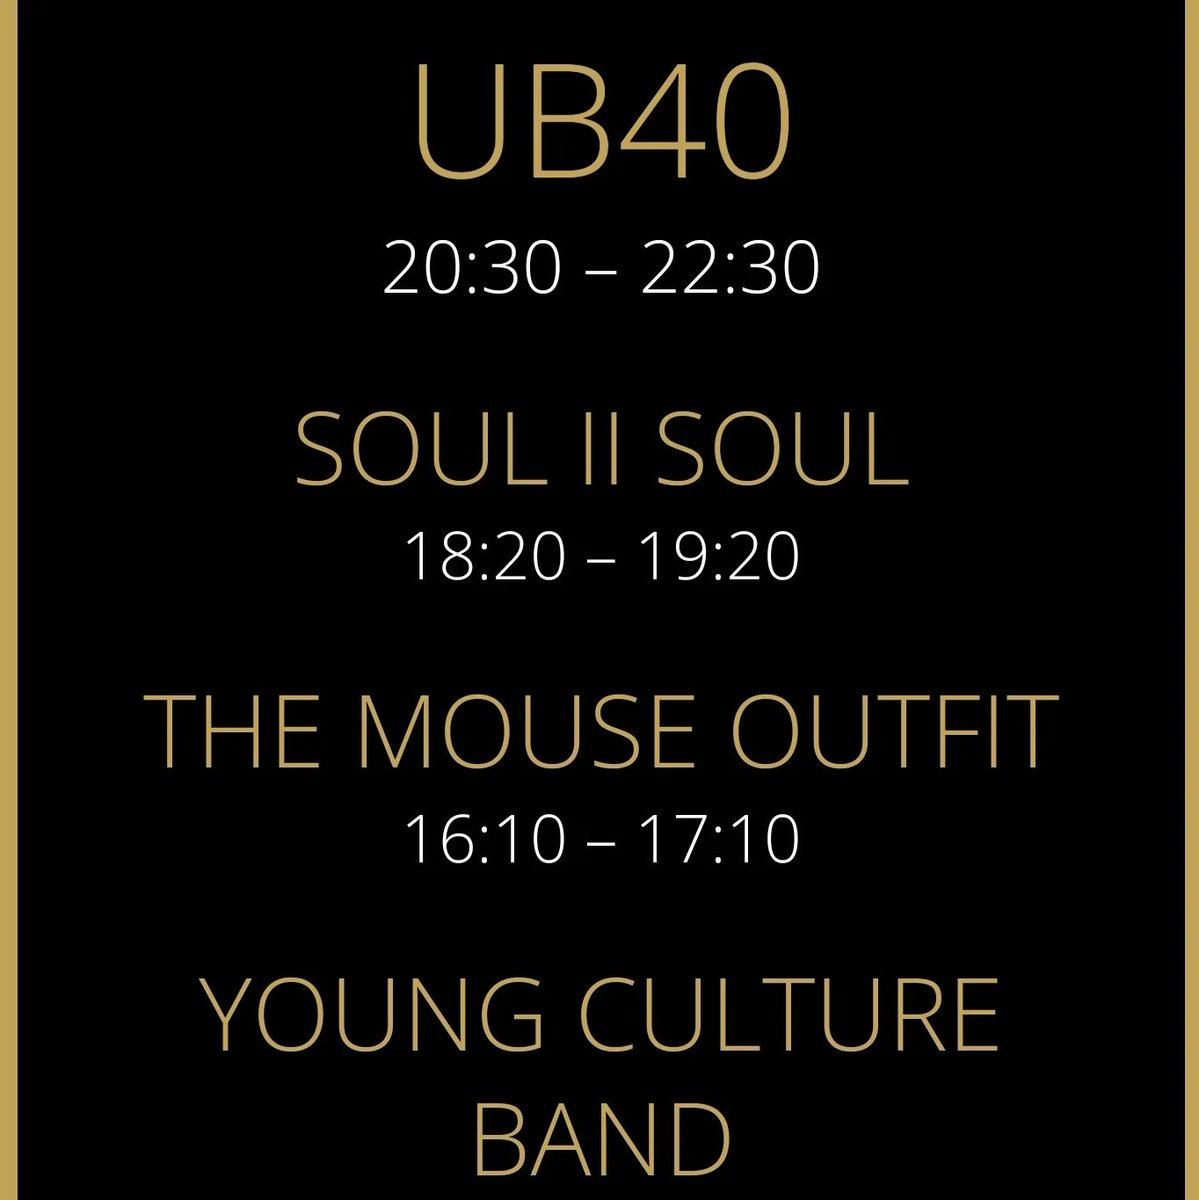 Sunday should be fun ! SOLD OUT 💥 @UB40OFFICIAL @Soul2SoulUK